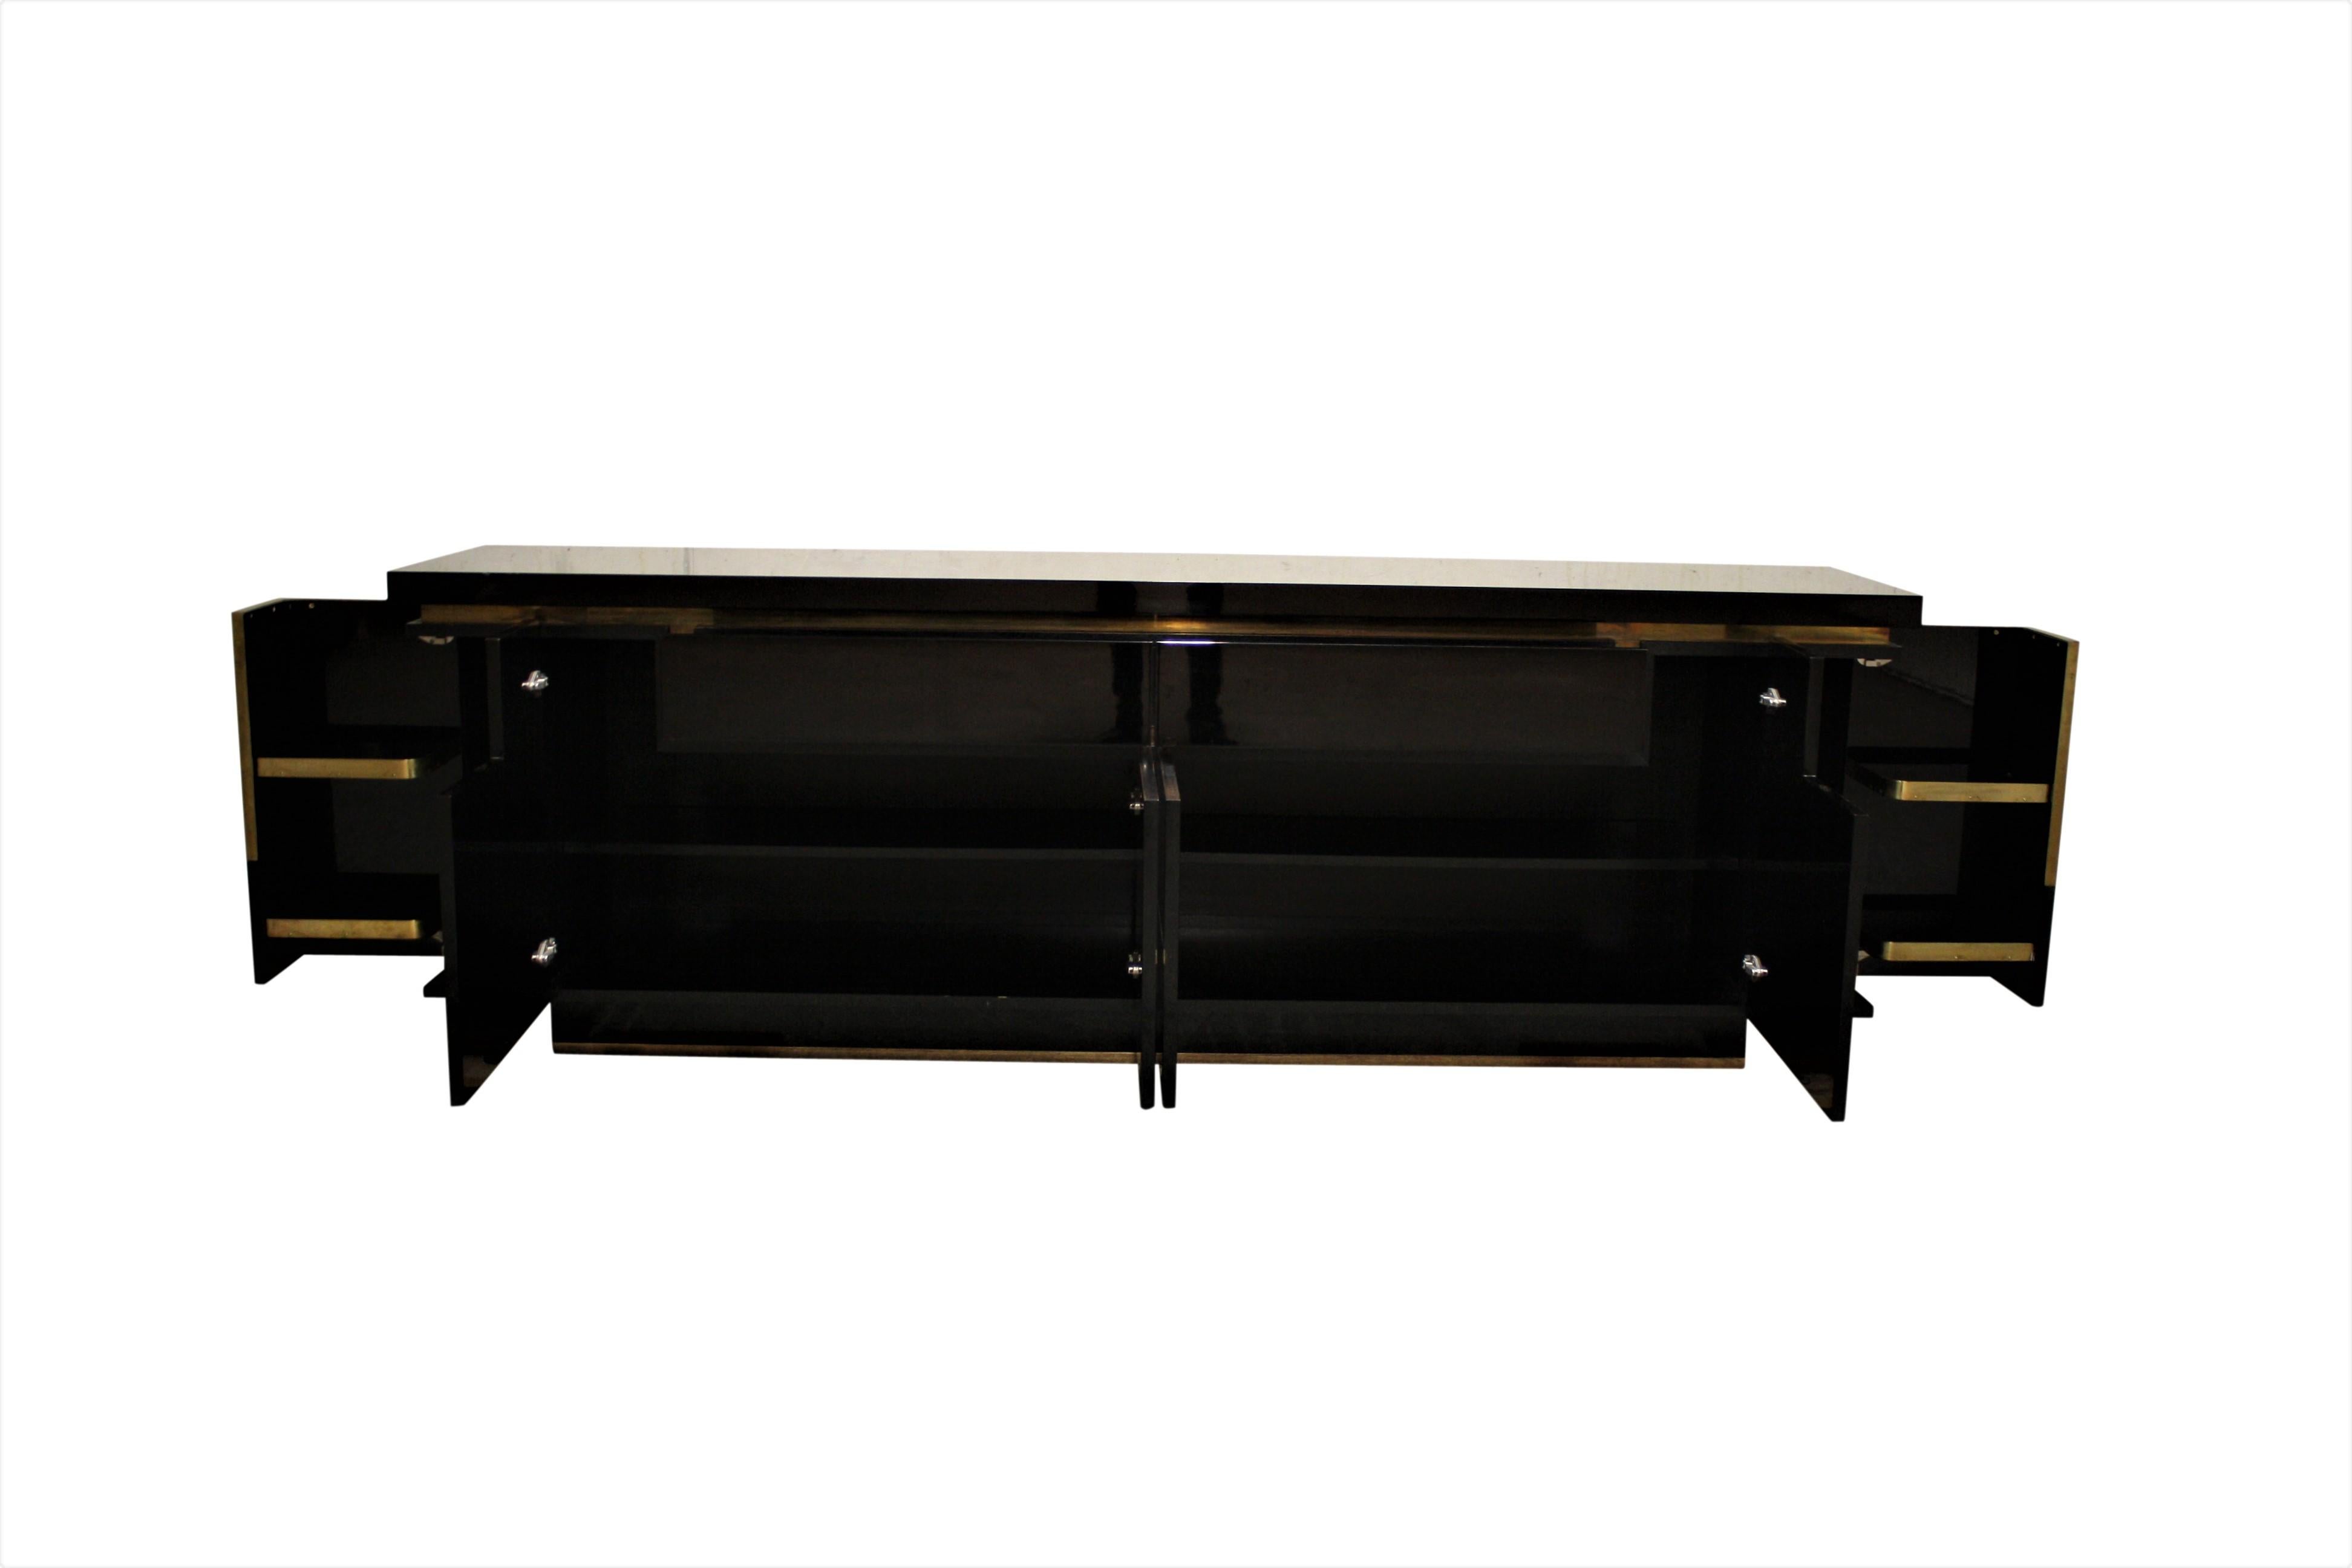 The credenza is made from high gloss mirroring black piano lacquer and copper.

It features two drawers and four doors and 2 bar compartments that open in an unusual way.

Altogether, this beautiful piece is a true eye catcher and a great